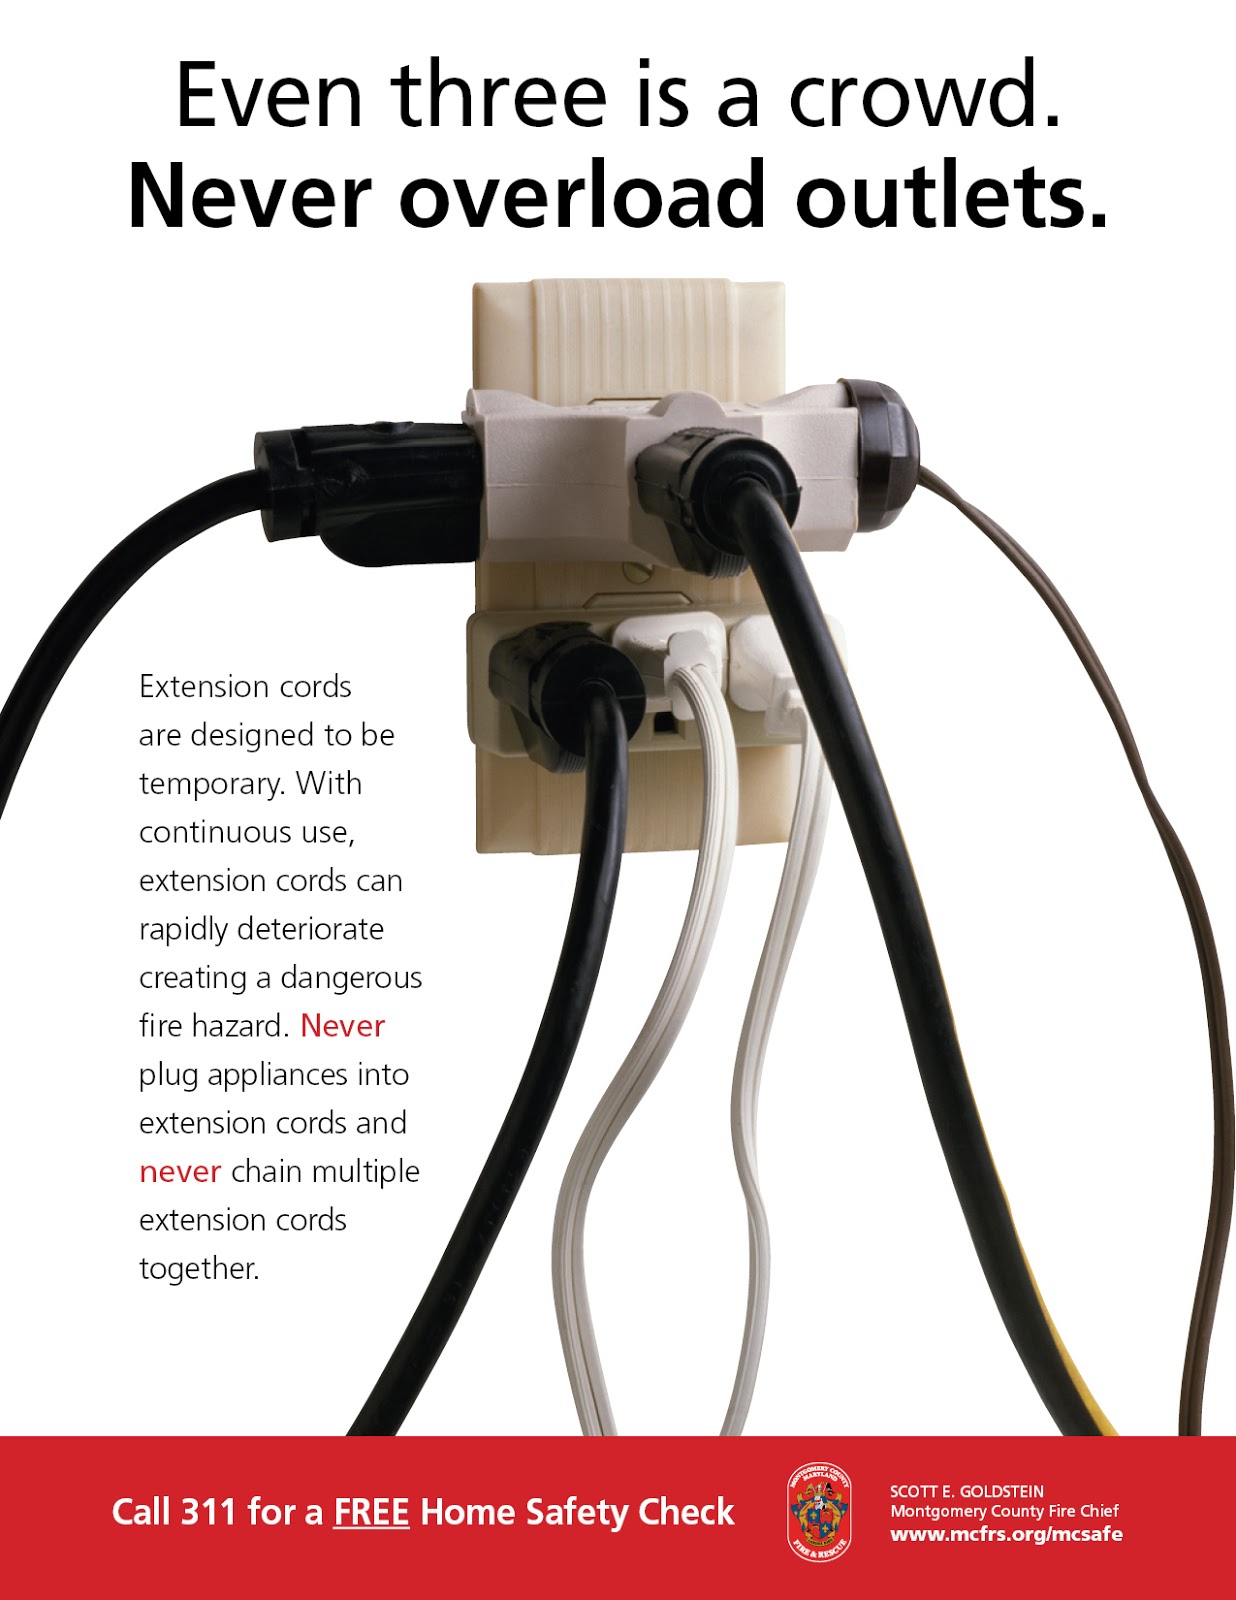 Safety at Home: Extension Cords